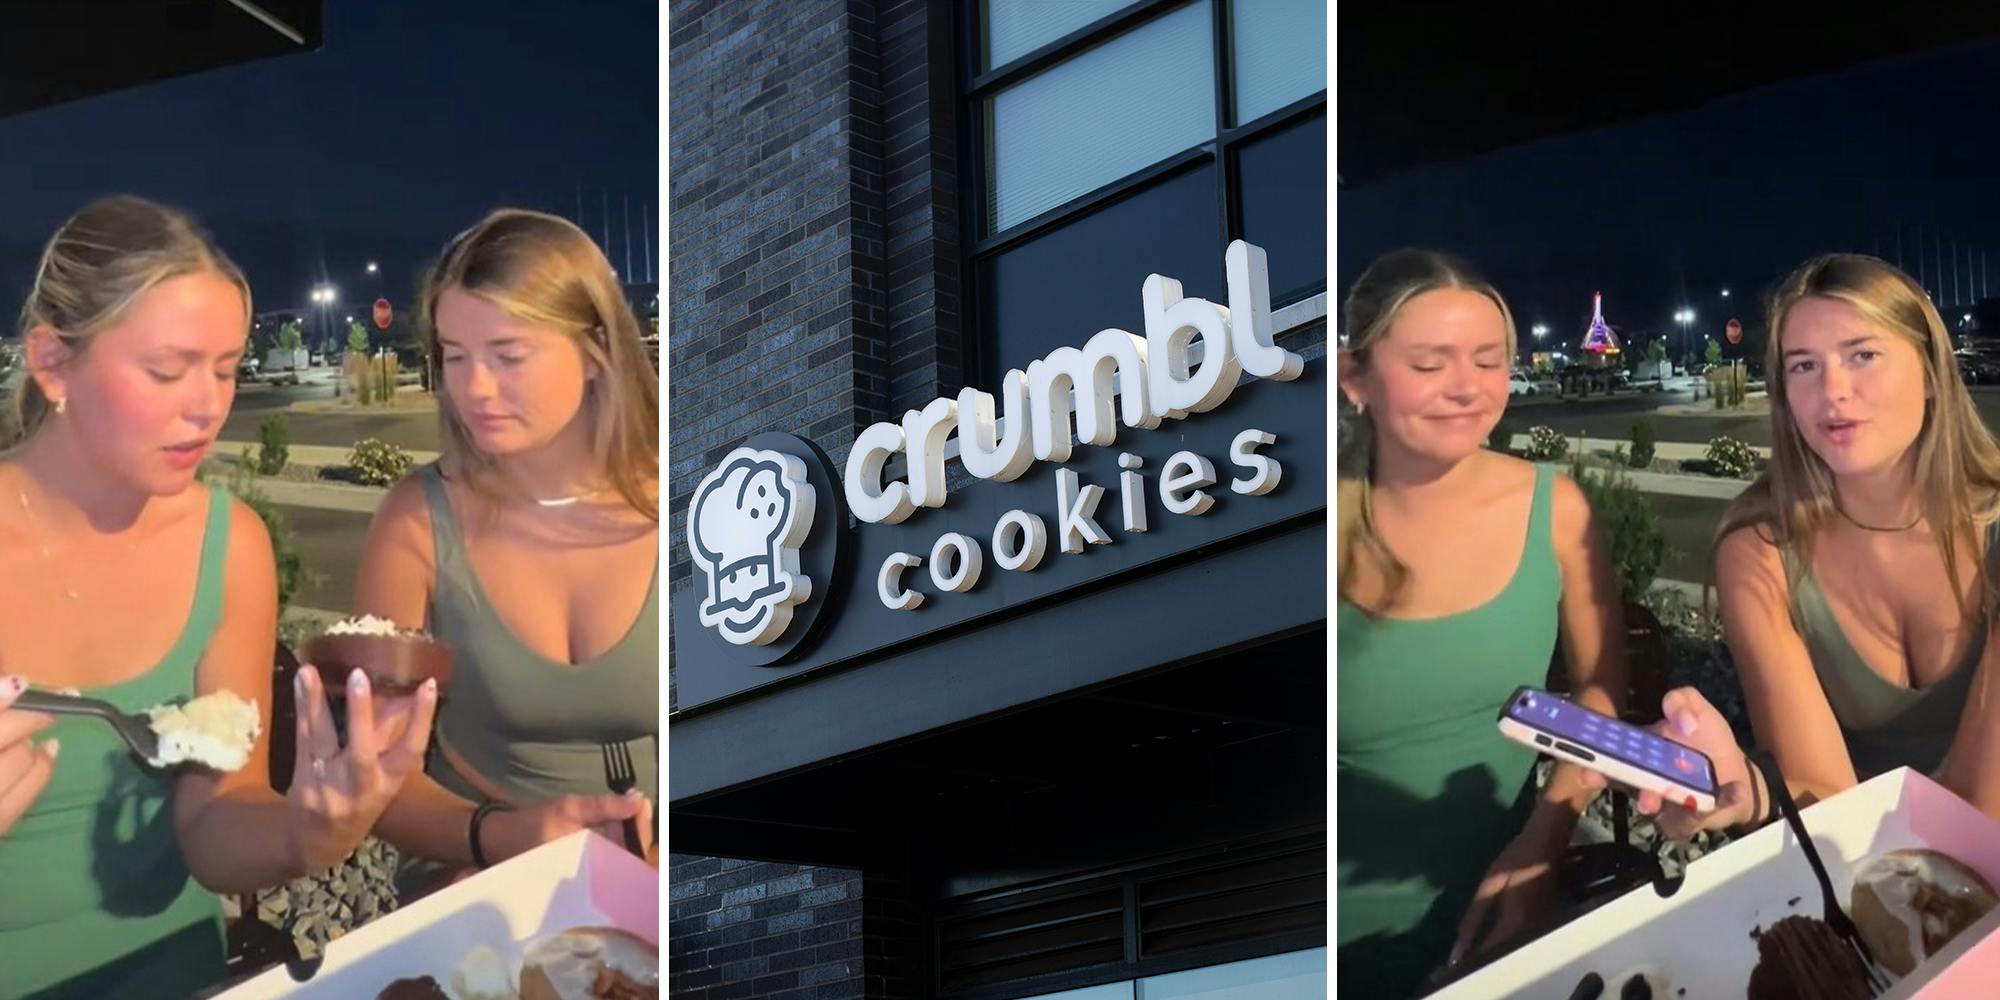 Customers ask for a refund after ordering cheesecake cookie. They can’t believe the employee’s response